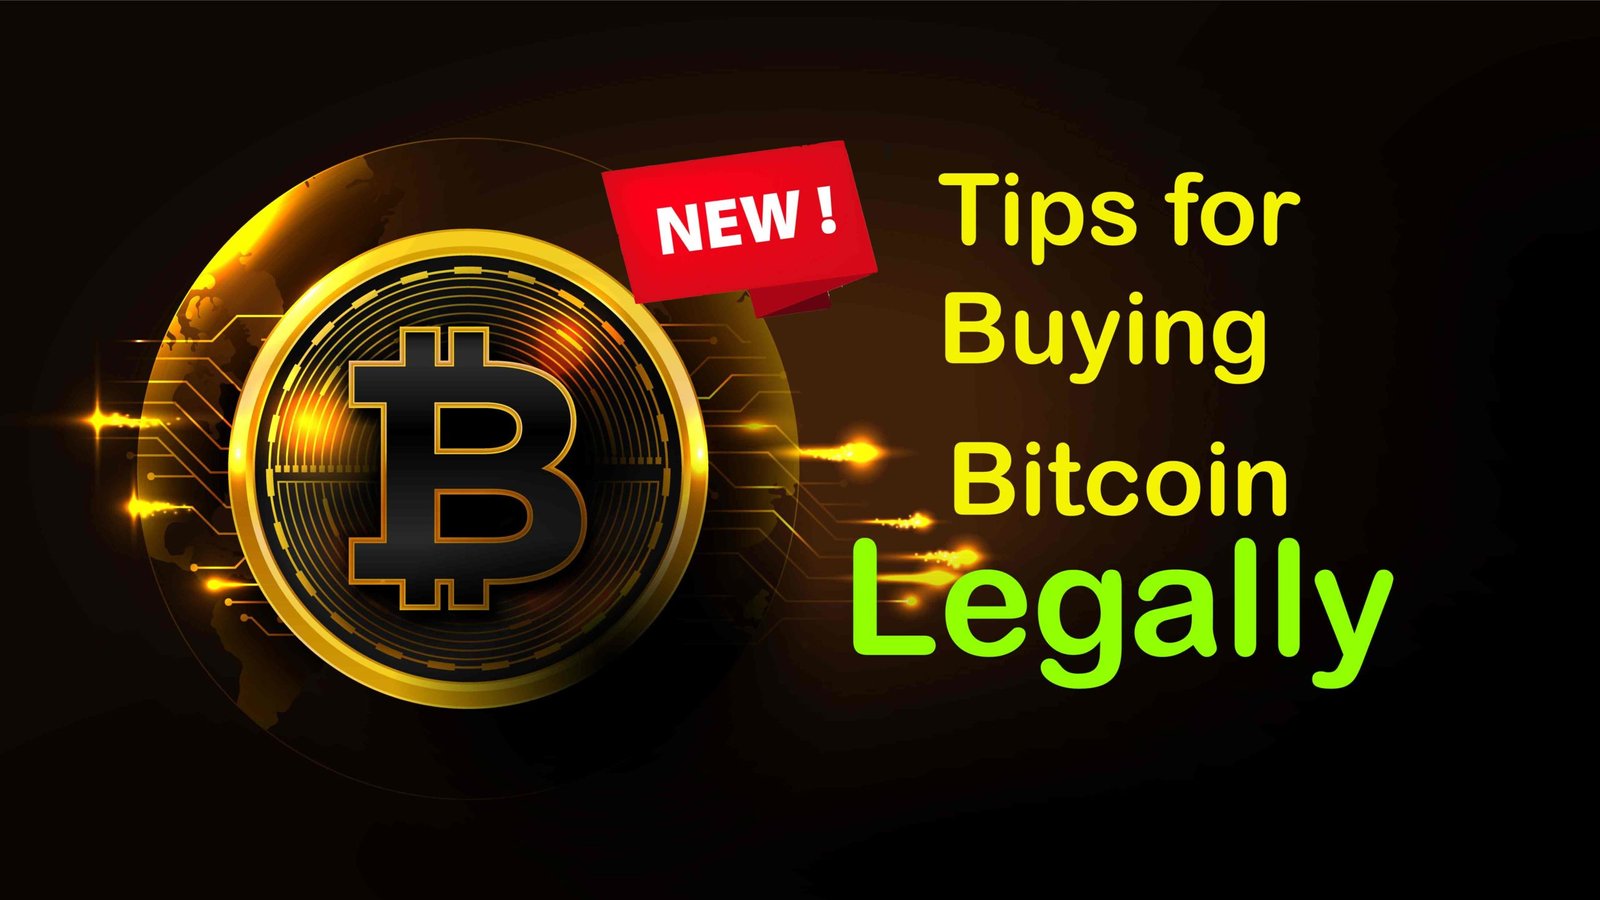 is it legal to buy bitcoins for a foreigner